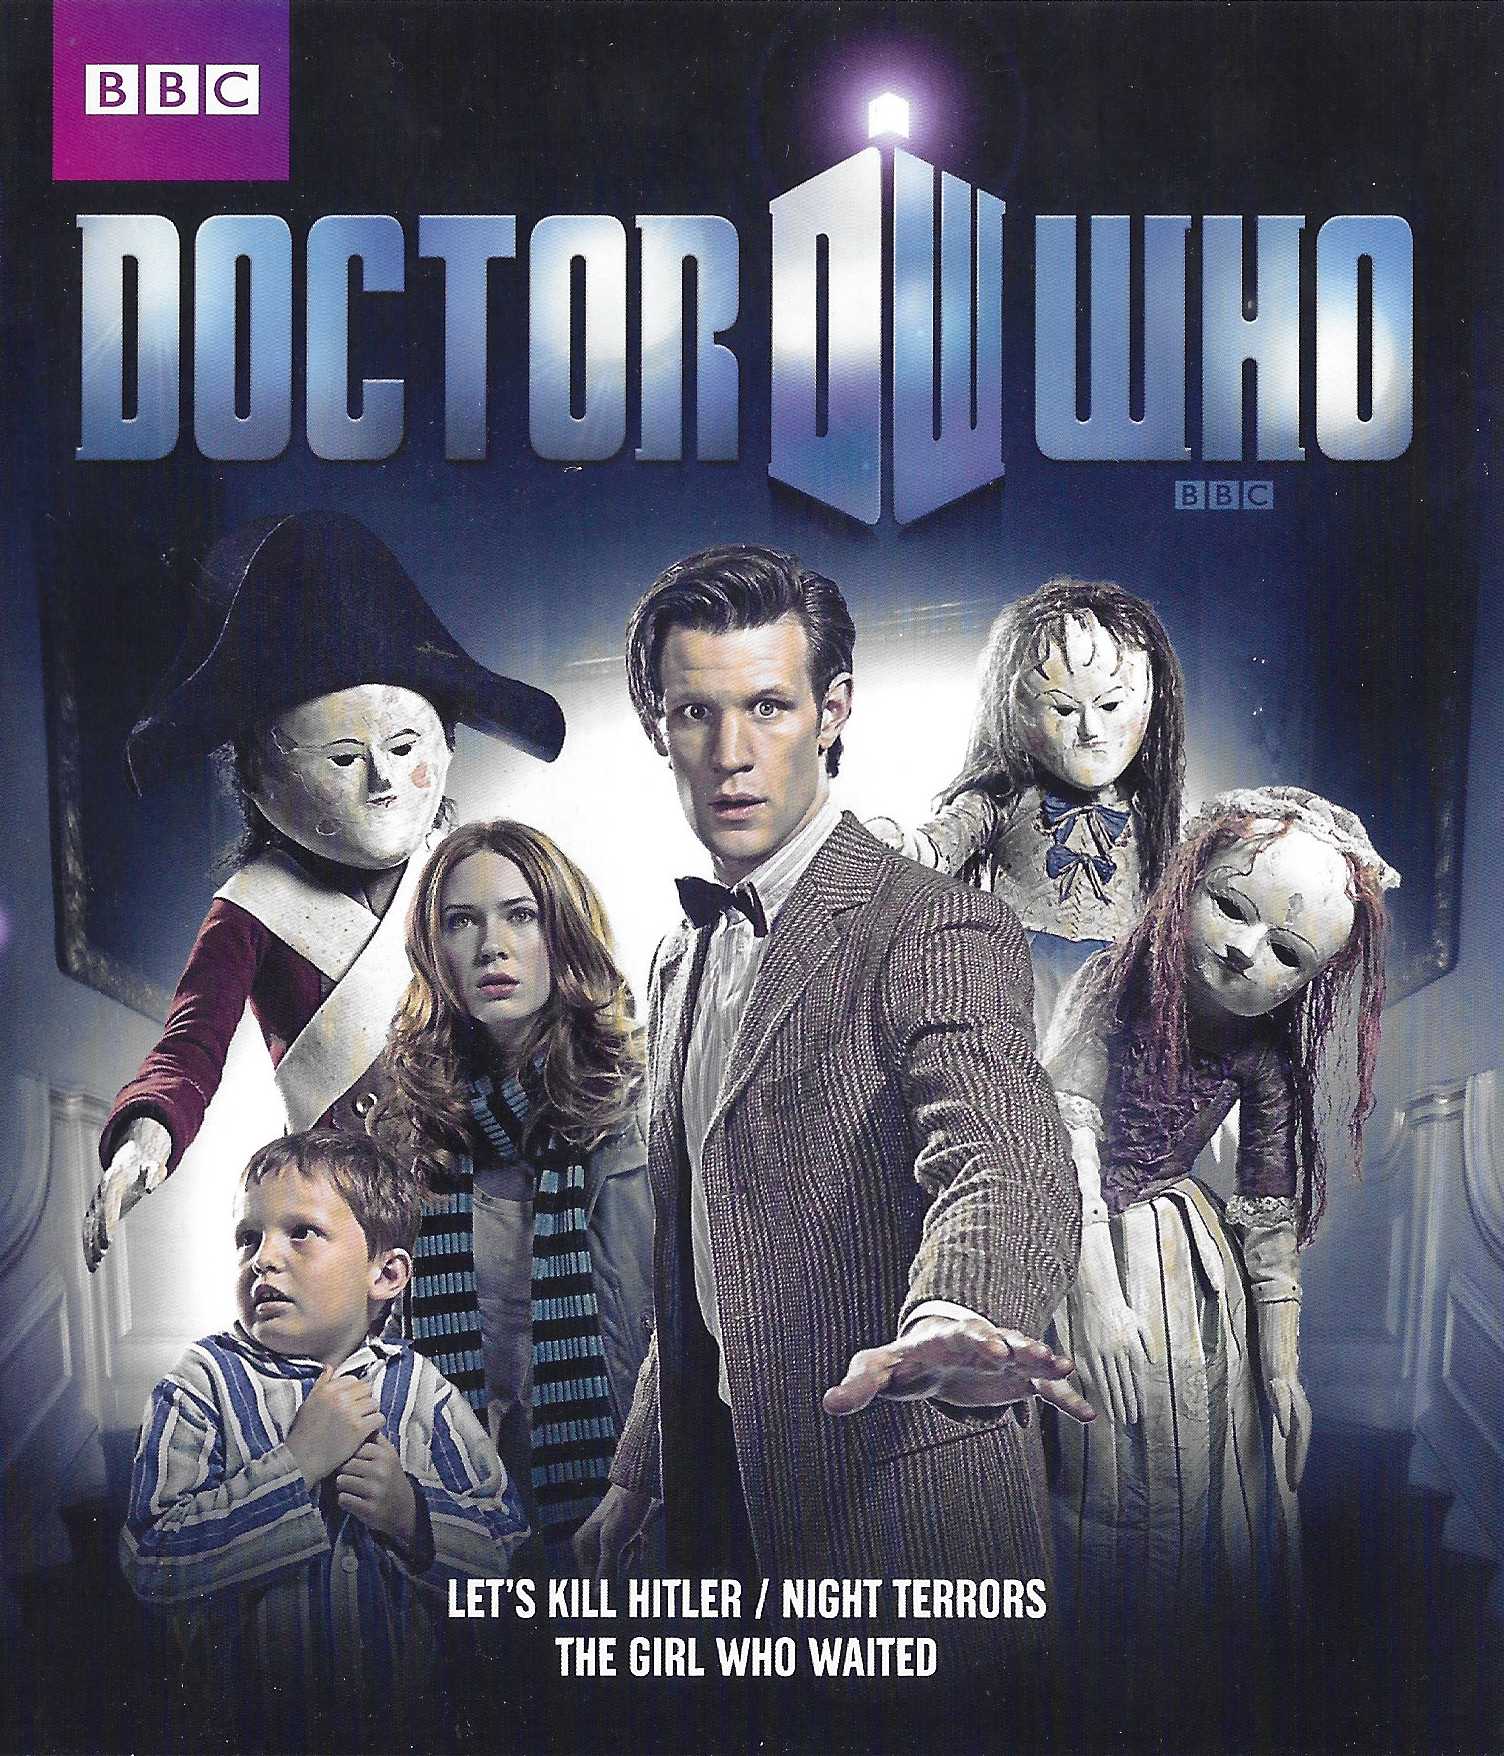 Picture of BBCBD 0152A Doctor Who - Series 6, part 2a by artist Steven Moffat / Mark Gatiss / Tom Macrae from the BBC blu-rays - Records and Tapes library